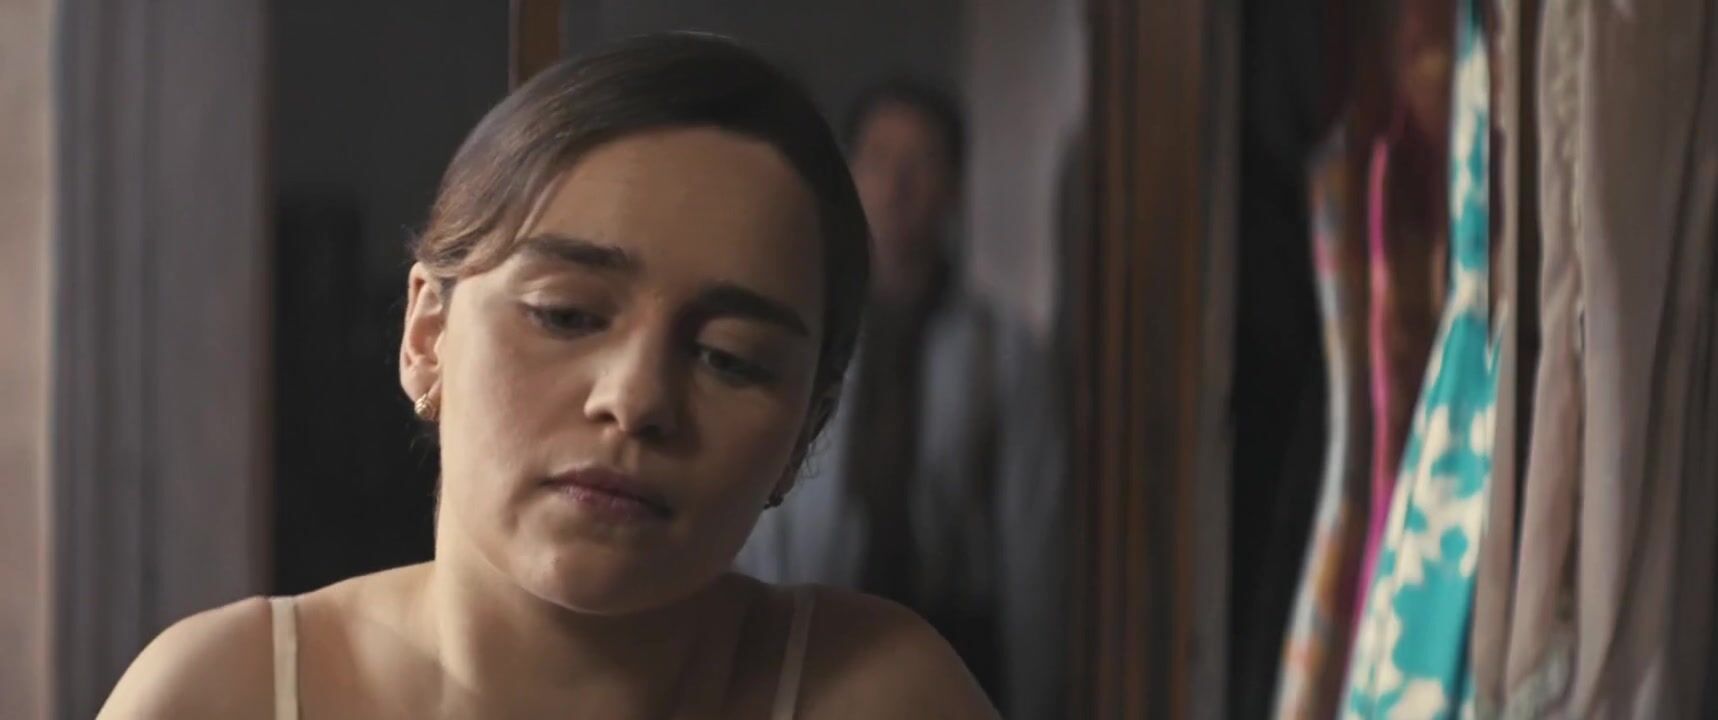 Show Hot movie whore Emilia Clarke shows off beautiful body in Voice from the Stone (2017) Free Rough Sex